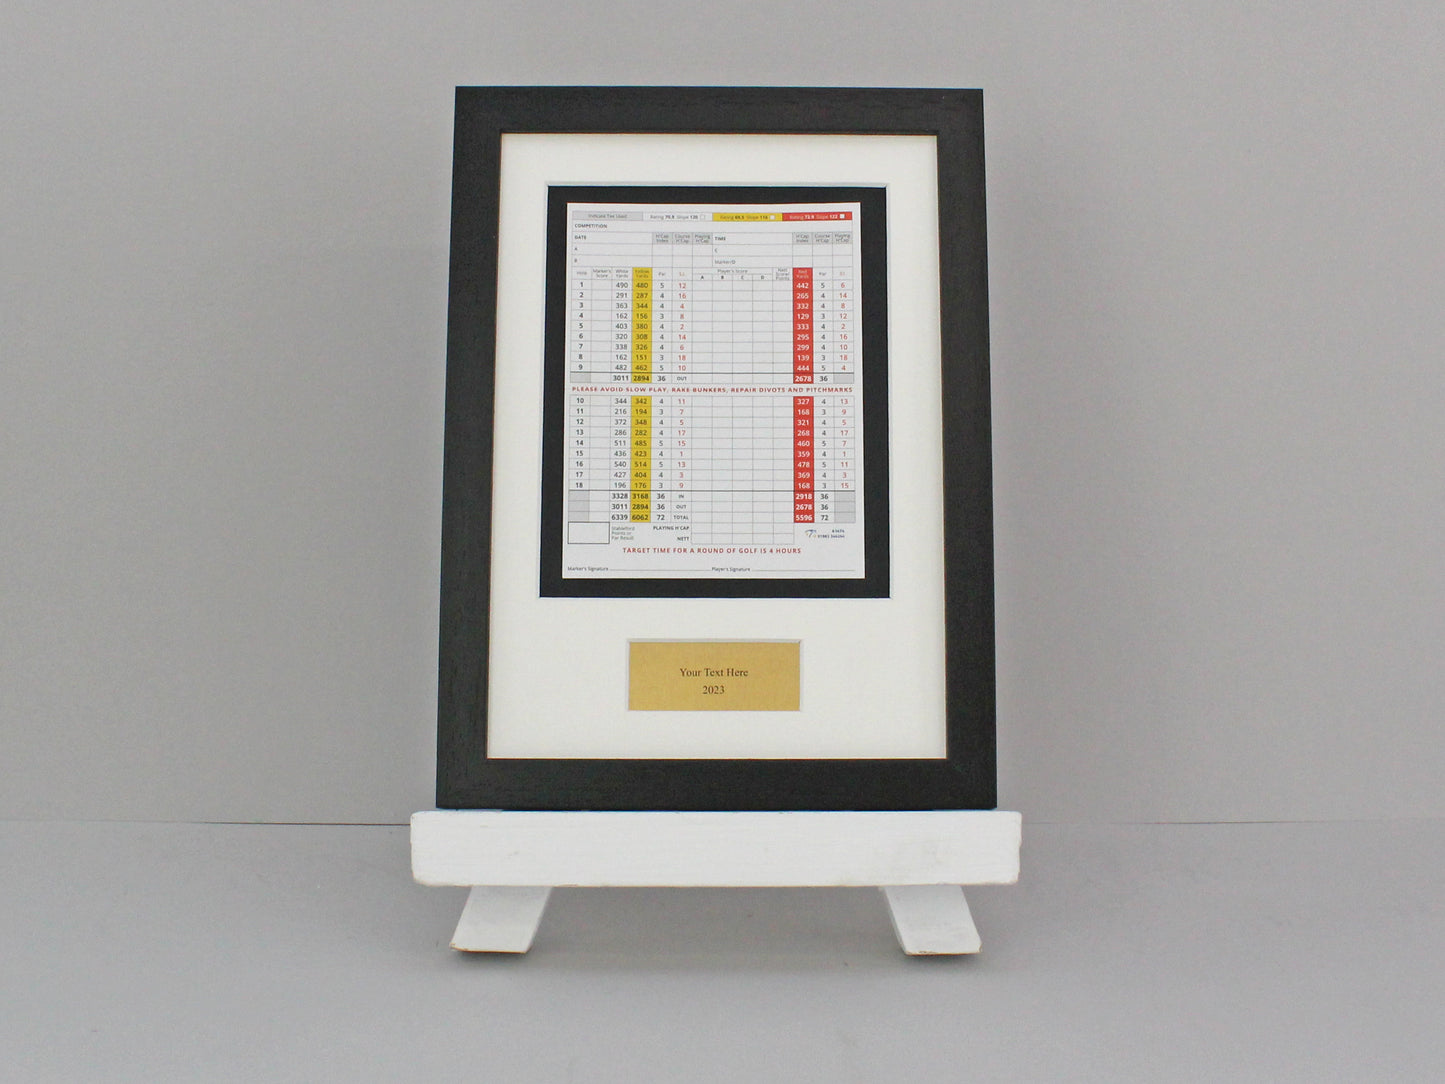 Personalised Golf Score Card Display Frame | Score Card sizes can vary - Check your size before purchase.